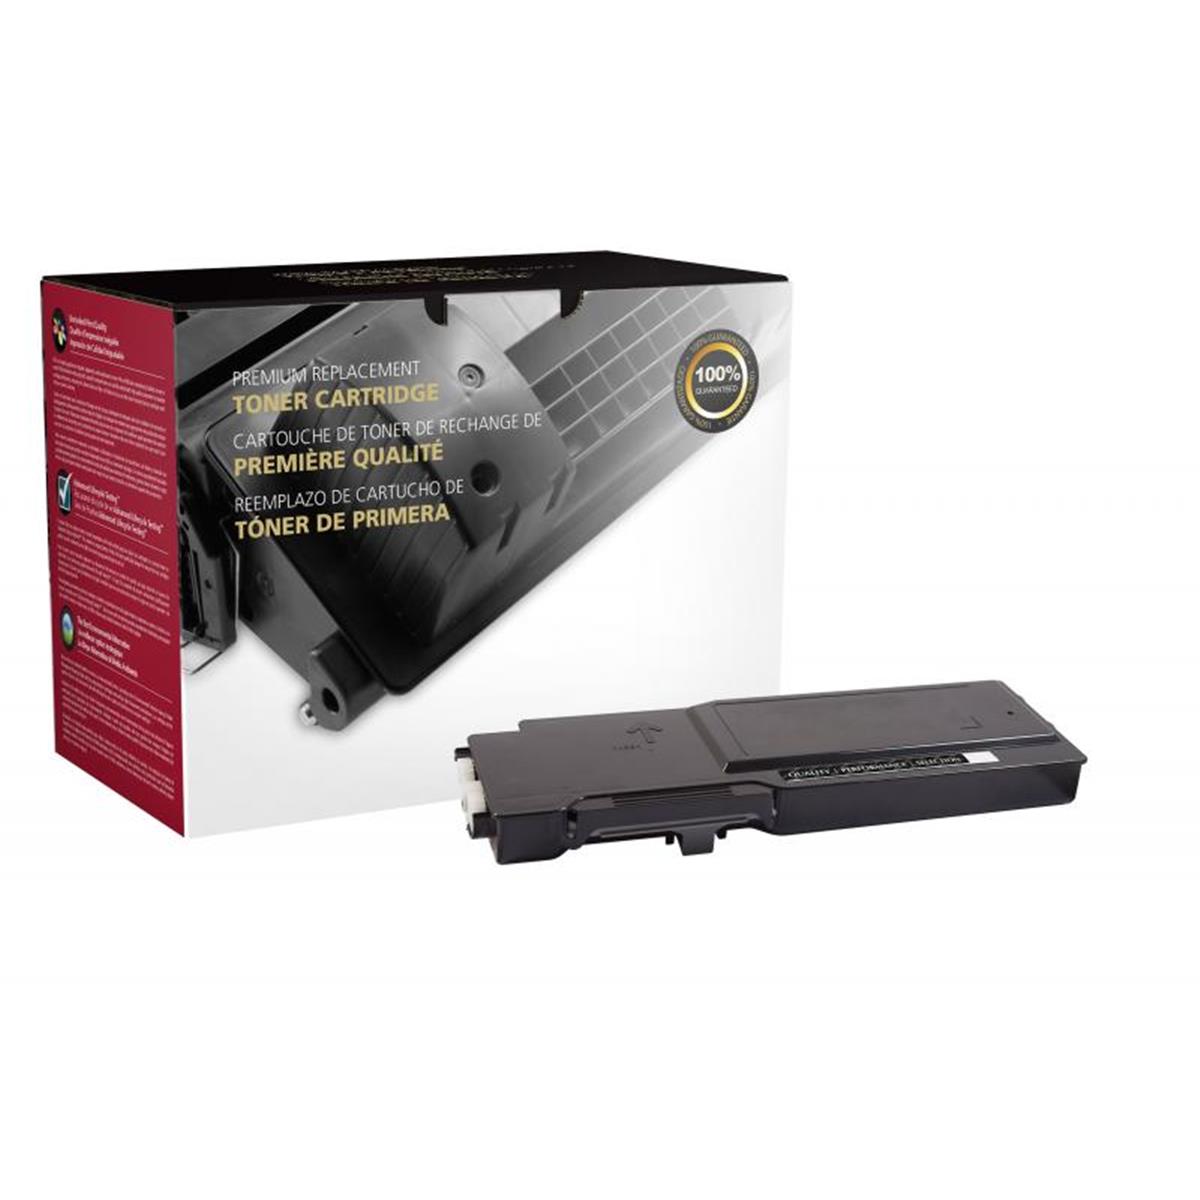 Picture of Dell 200810 High Yield Black Toner Cartridge for Dell C2660